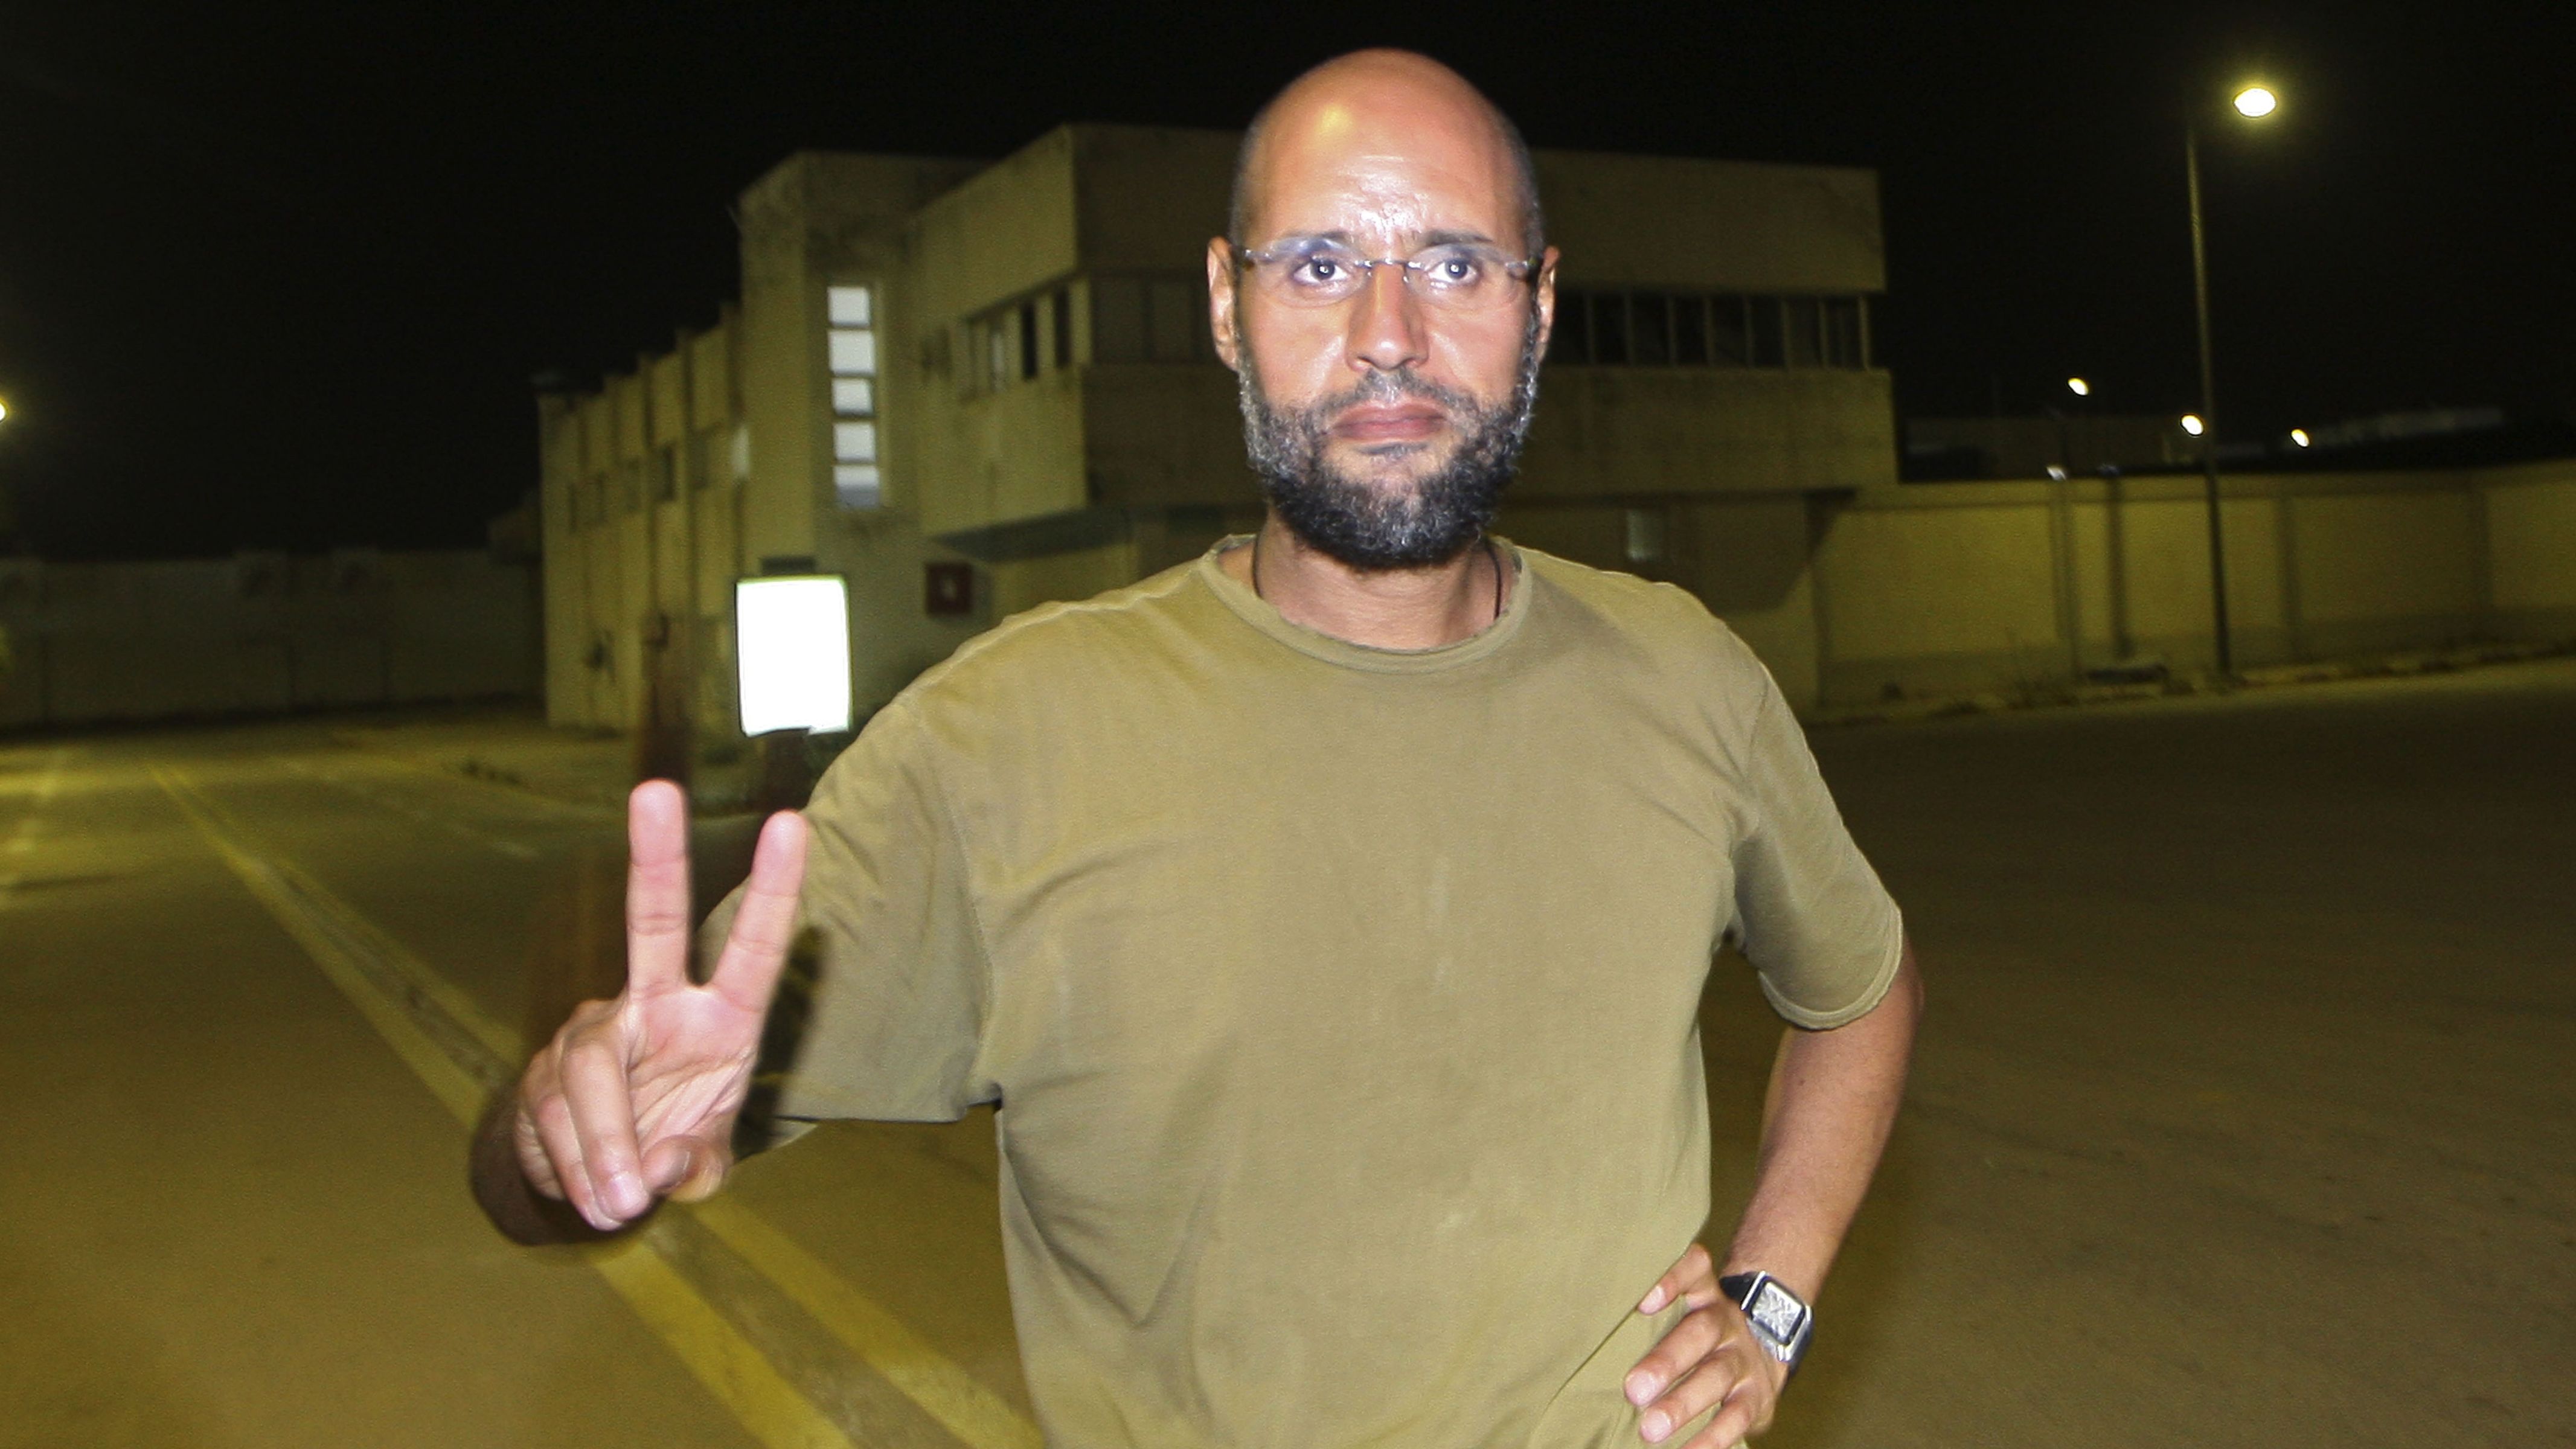 Saif al-Islam, son of late former Libyan leader Moammar Gadhafi, is wanted for crimes against humanity.